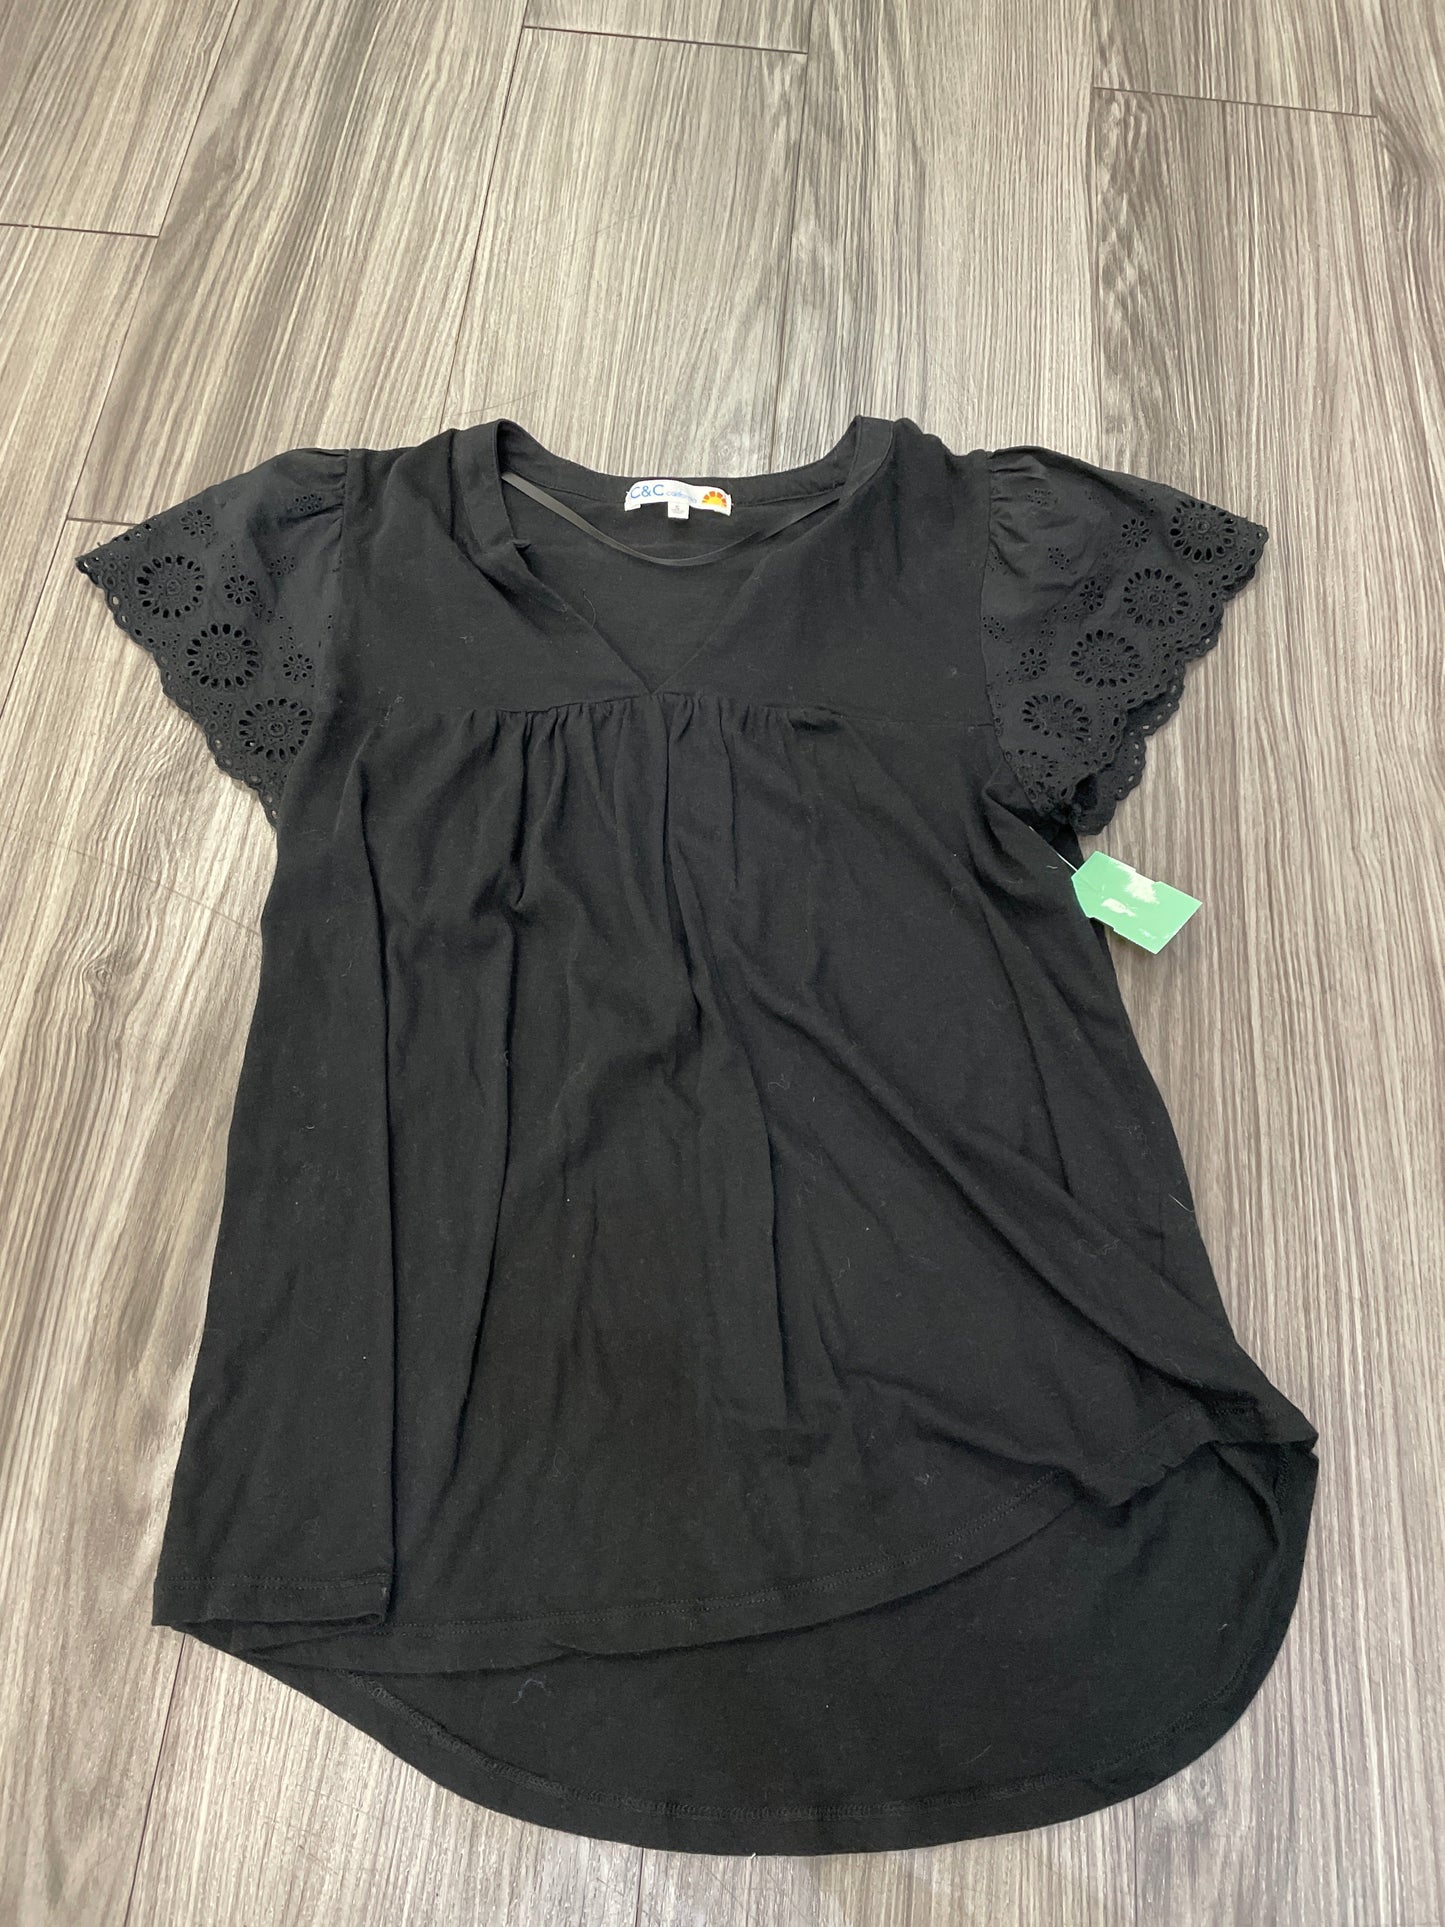 Black Top Short Sleeve C And C, Size S